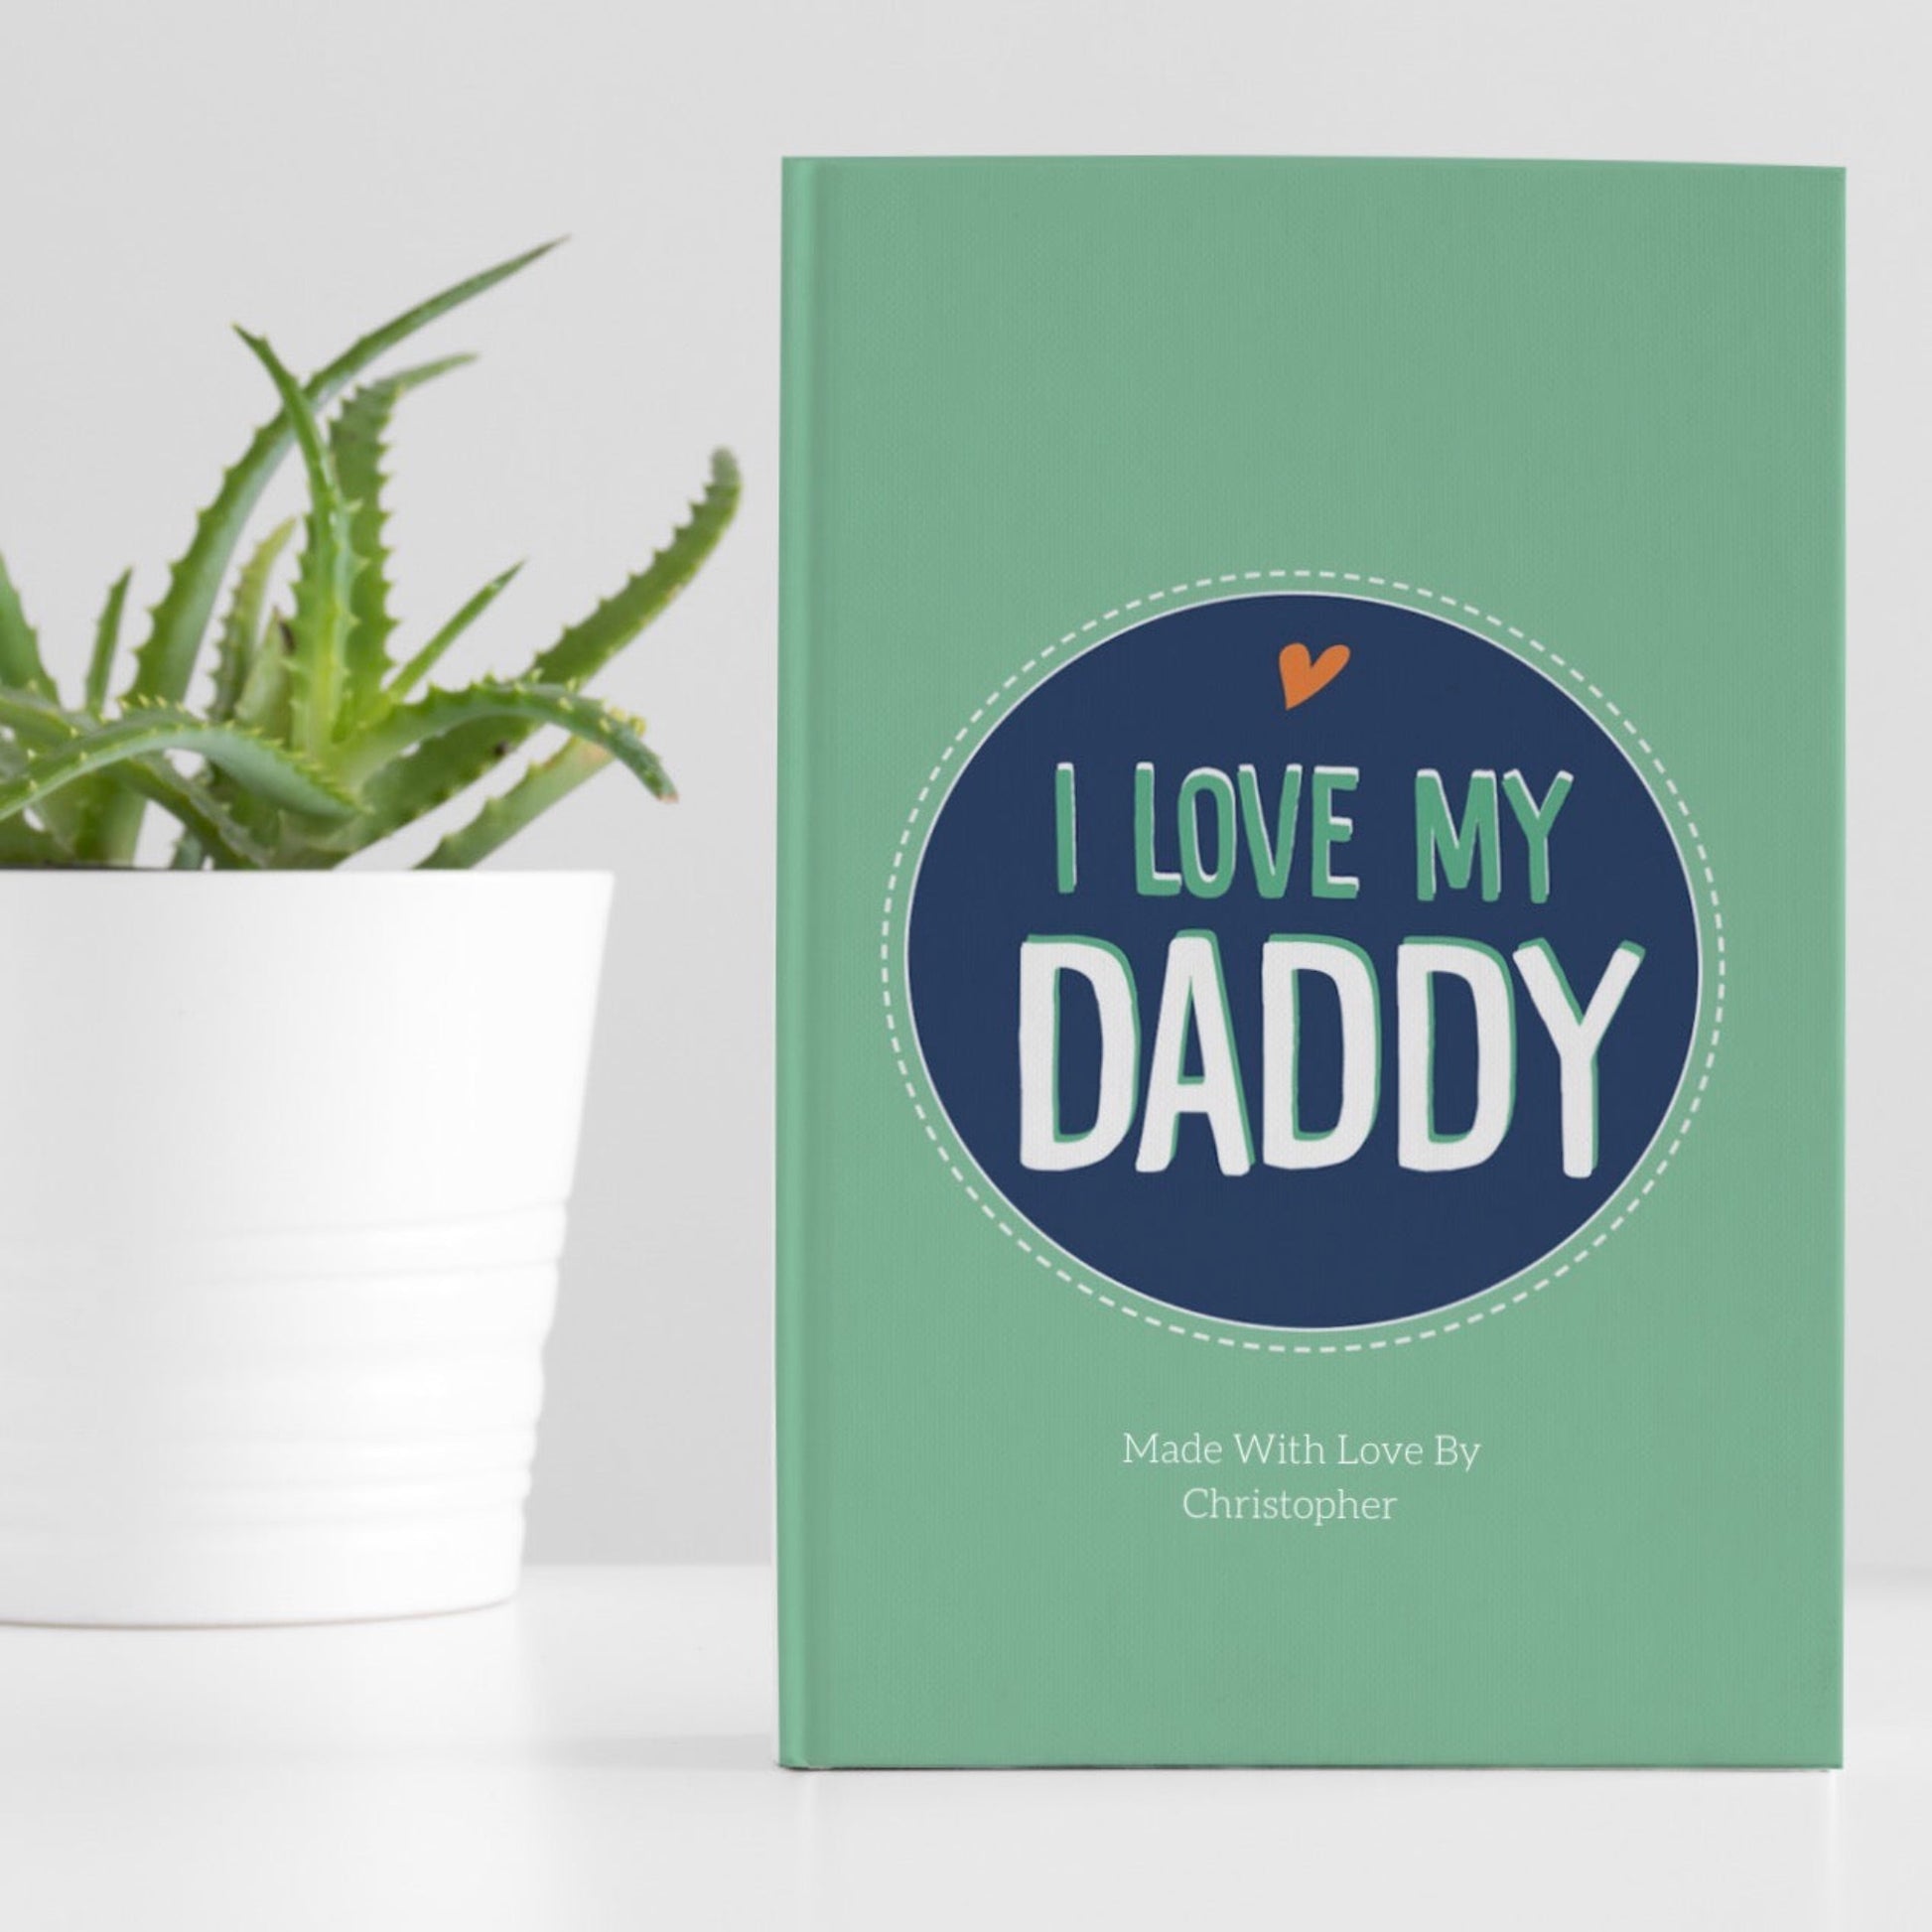 I love my daddy personalized book. Fill in the blank book. Luhvee Books.